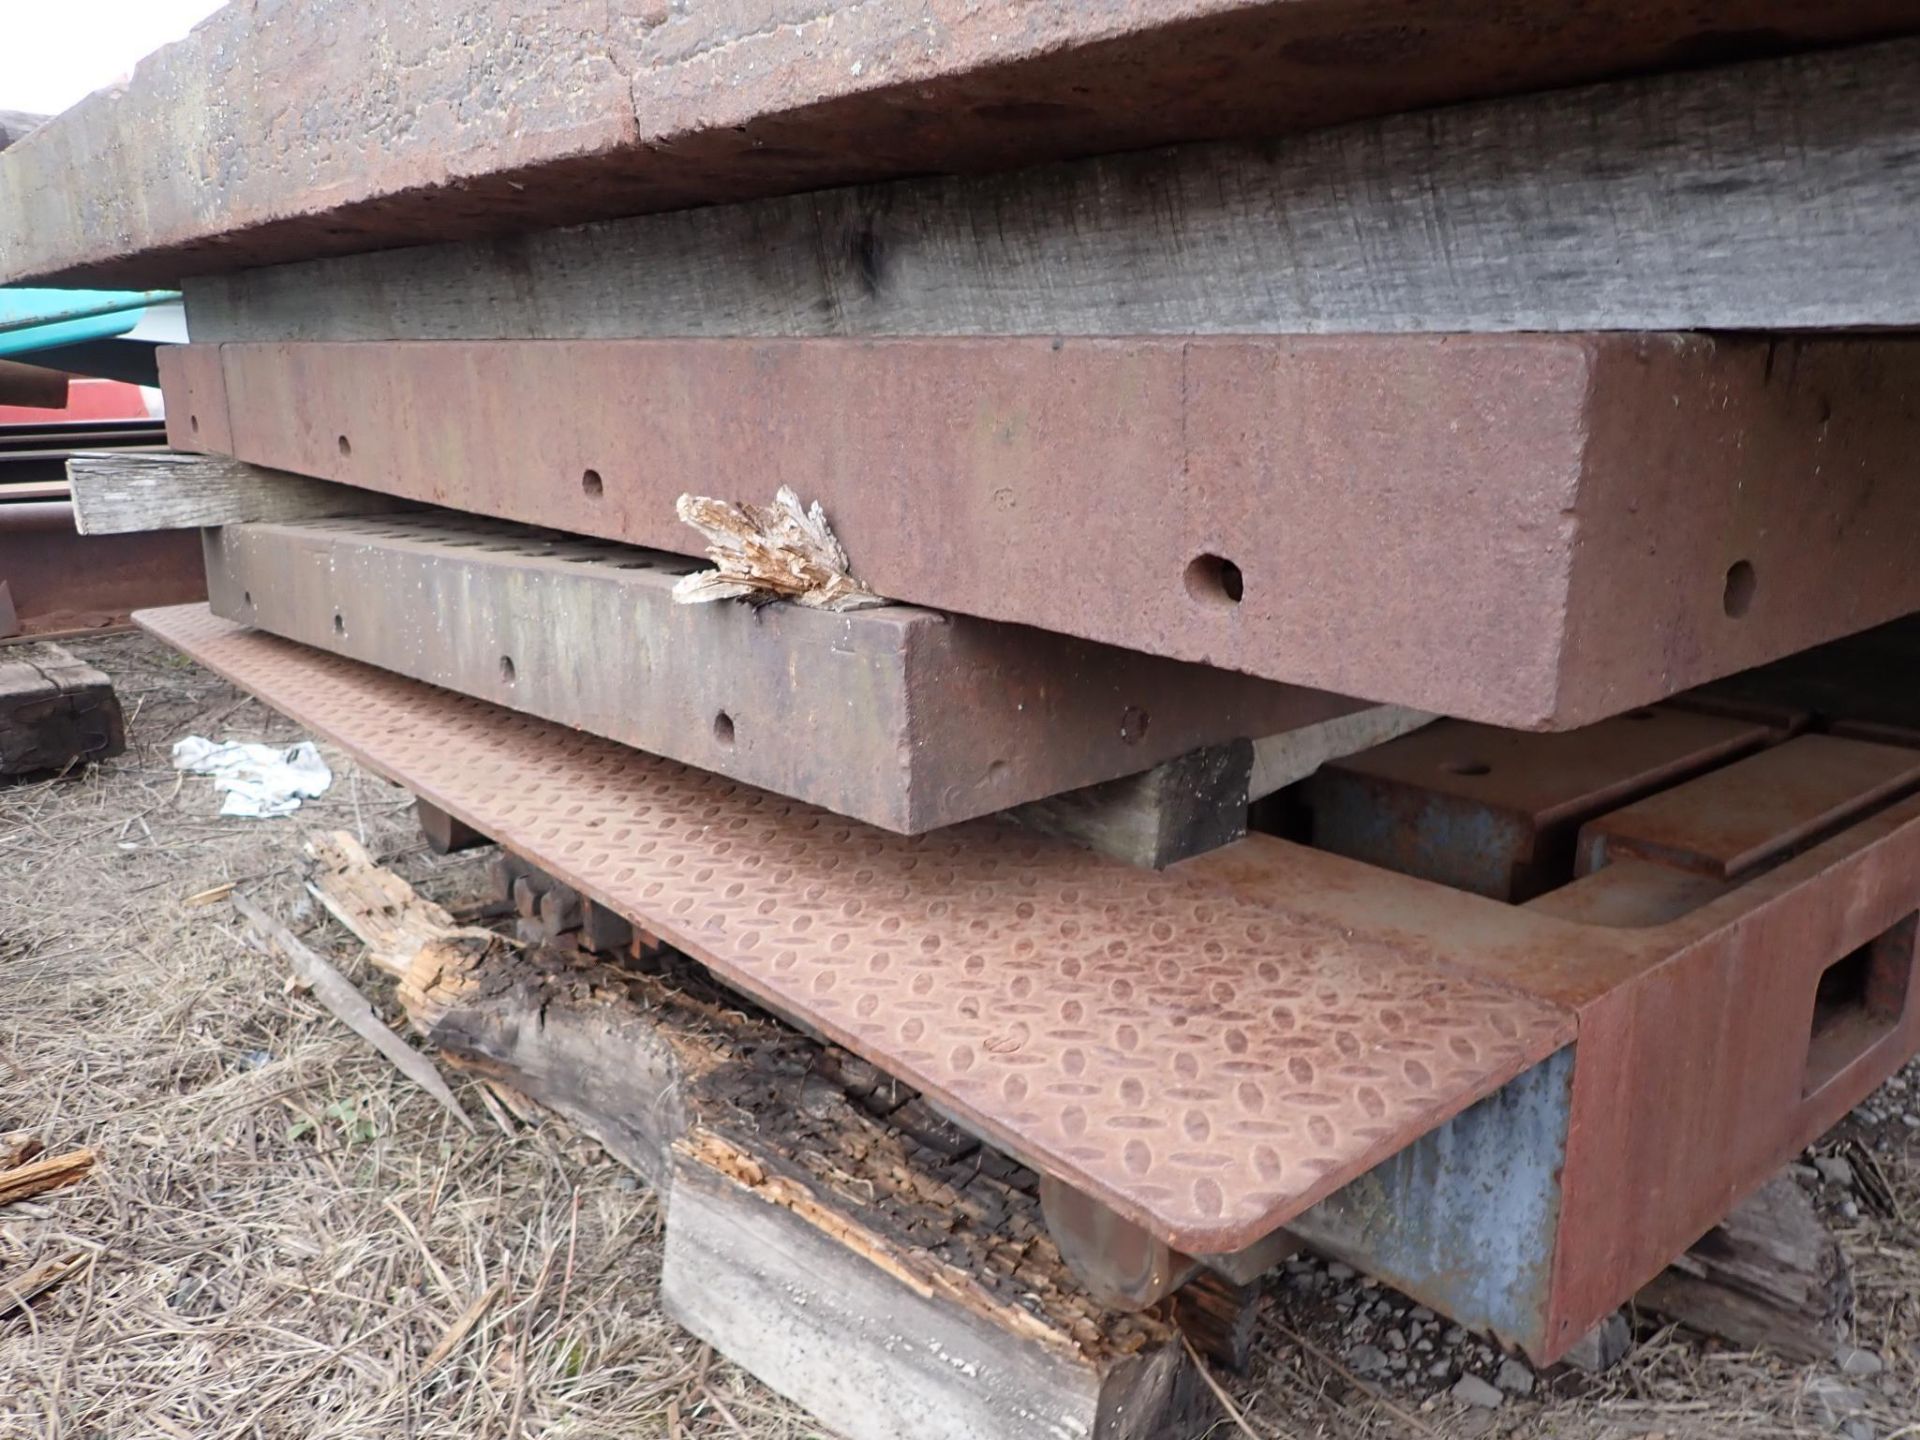 Acorn Type Welding Platen 86" x 61" x 6" high 1-7/8" square holes This item will have an additional - Image 23 of 24